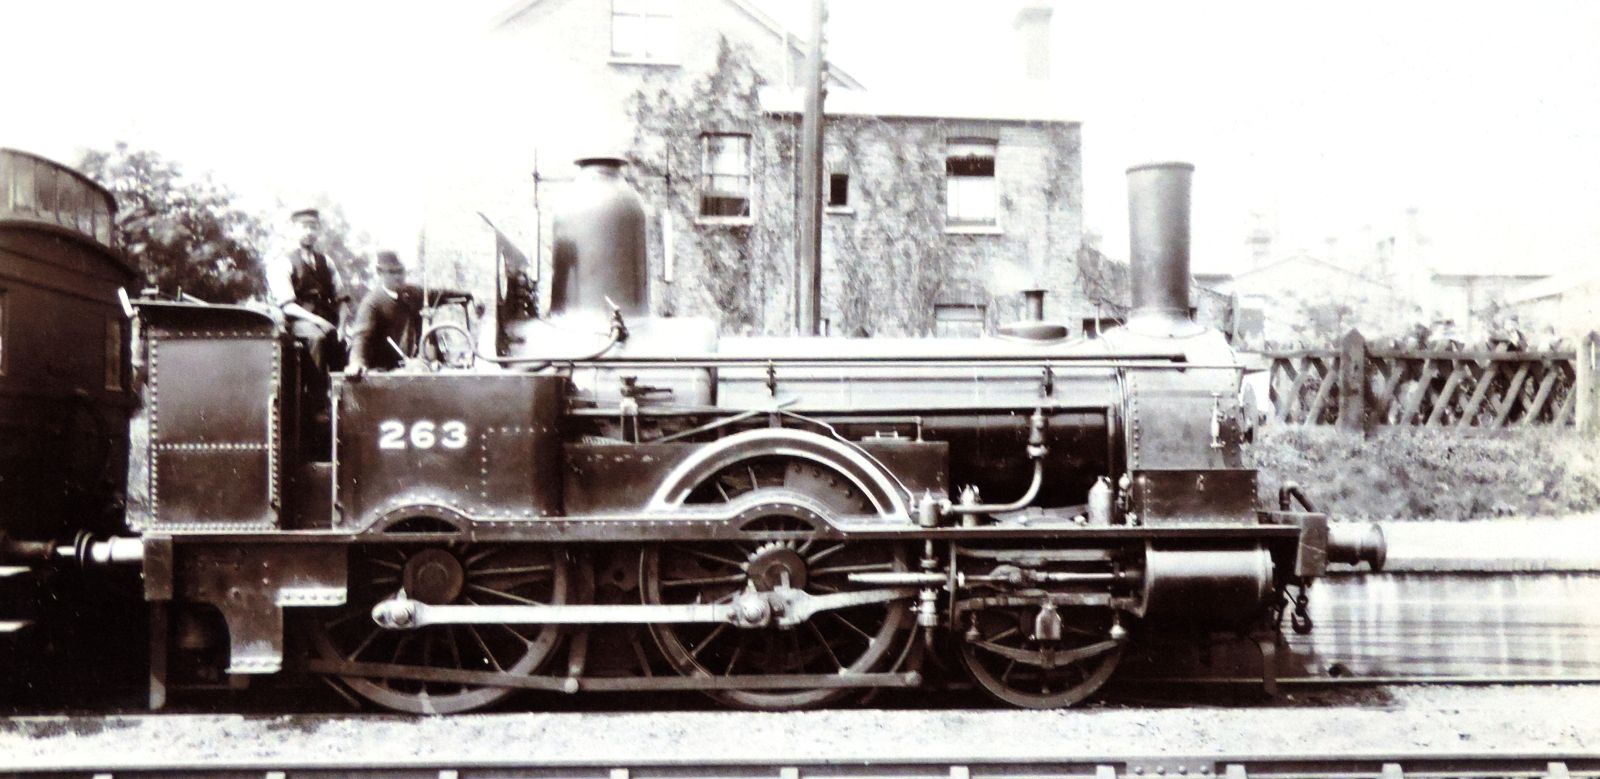 No. 263 in the condition as delivered